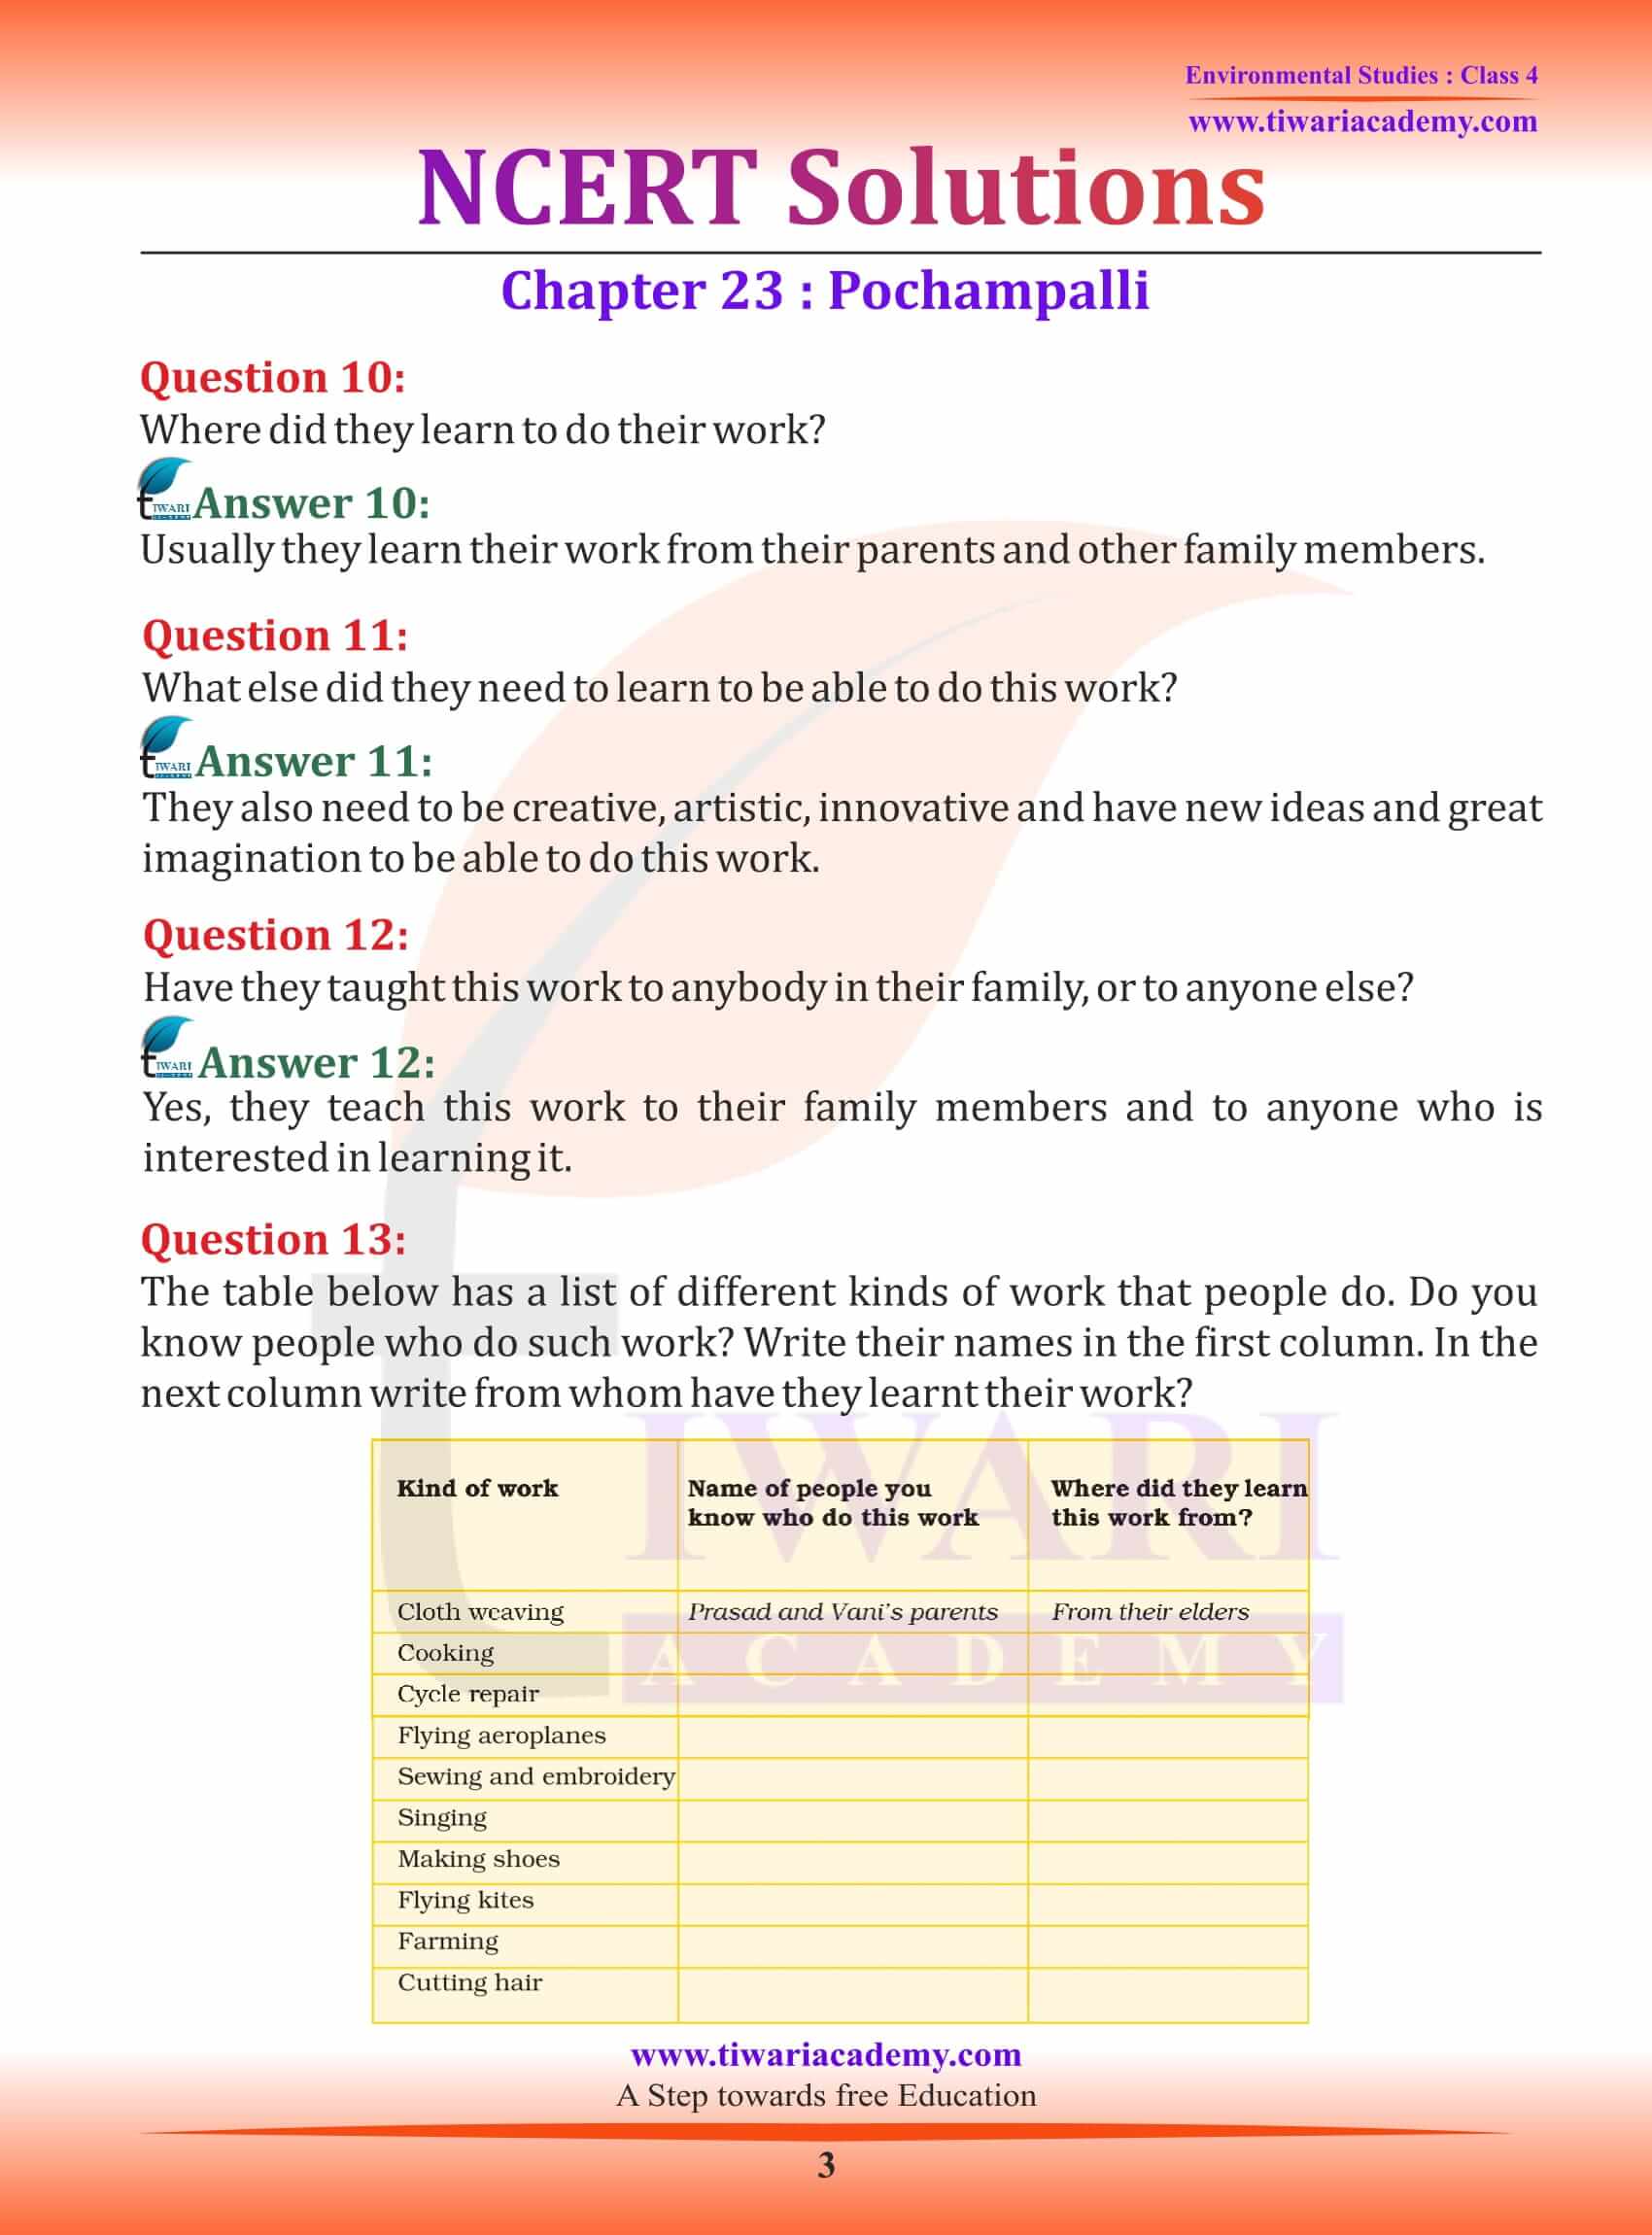 NCERT Solutions for Class 4 EVS Chapter 23